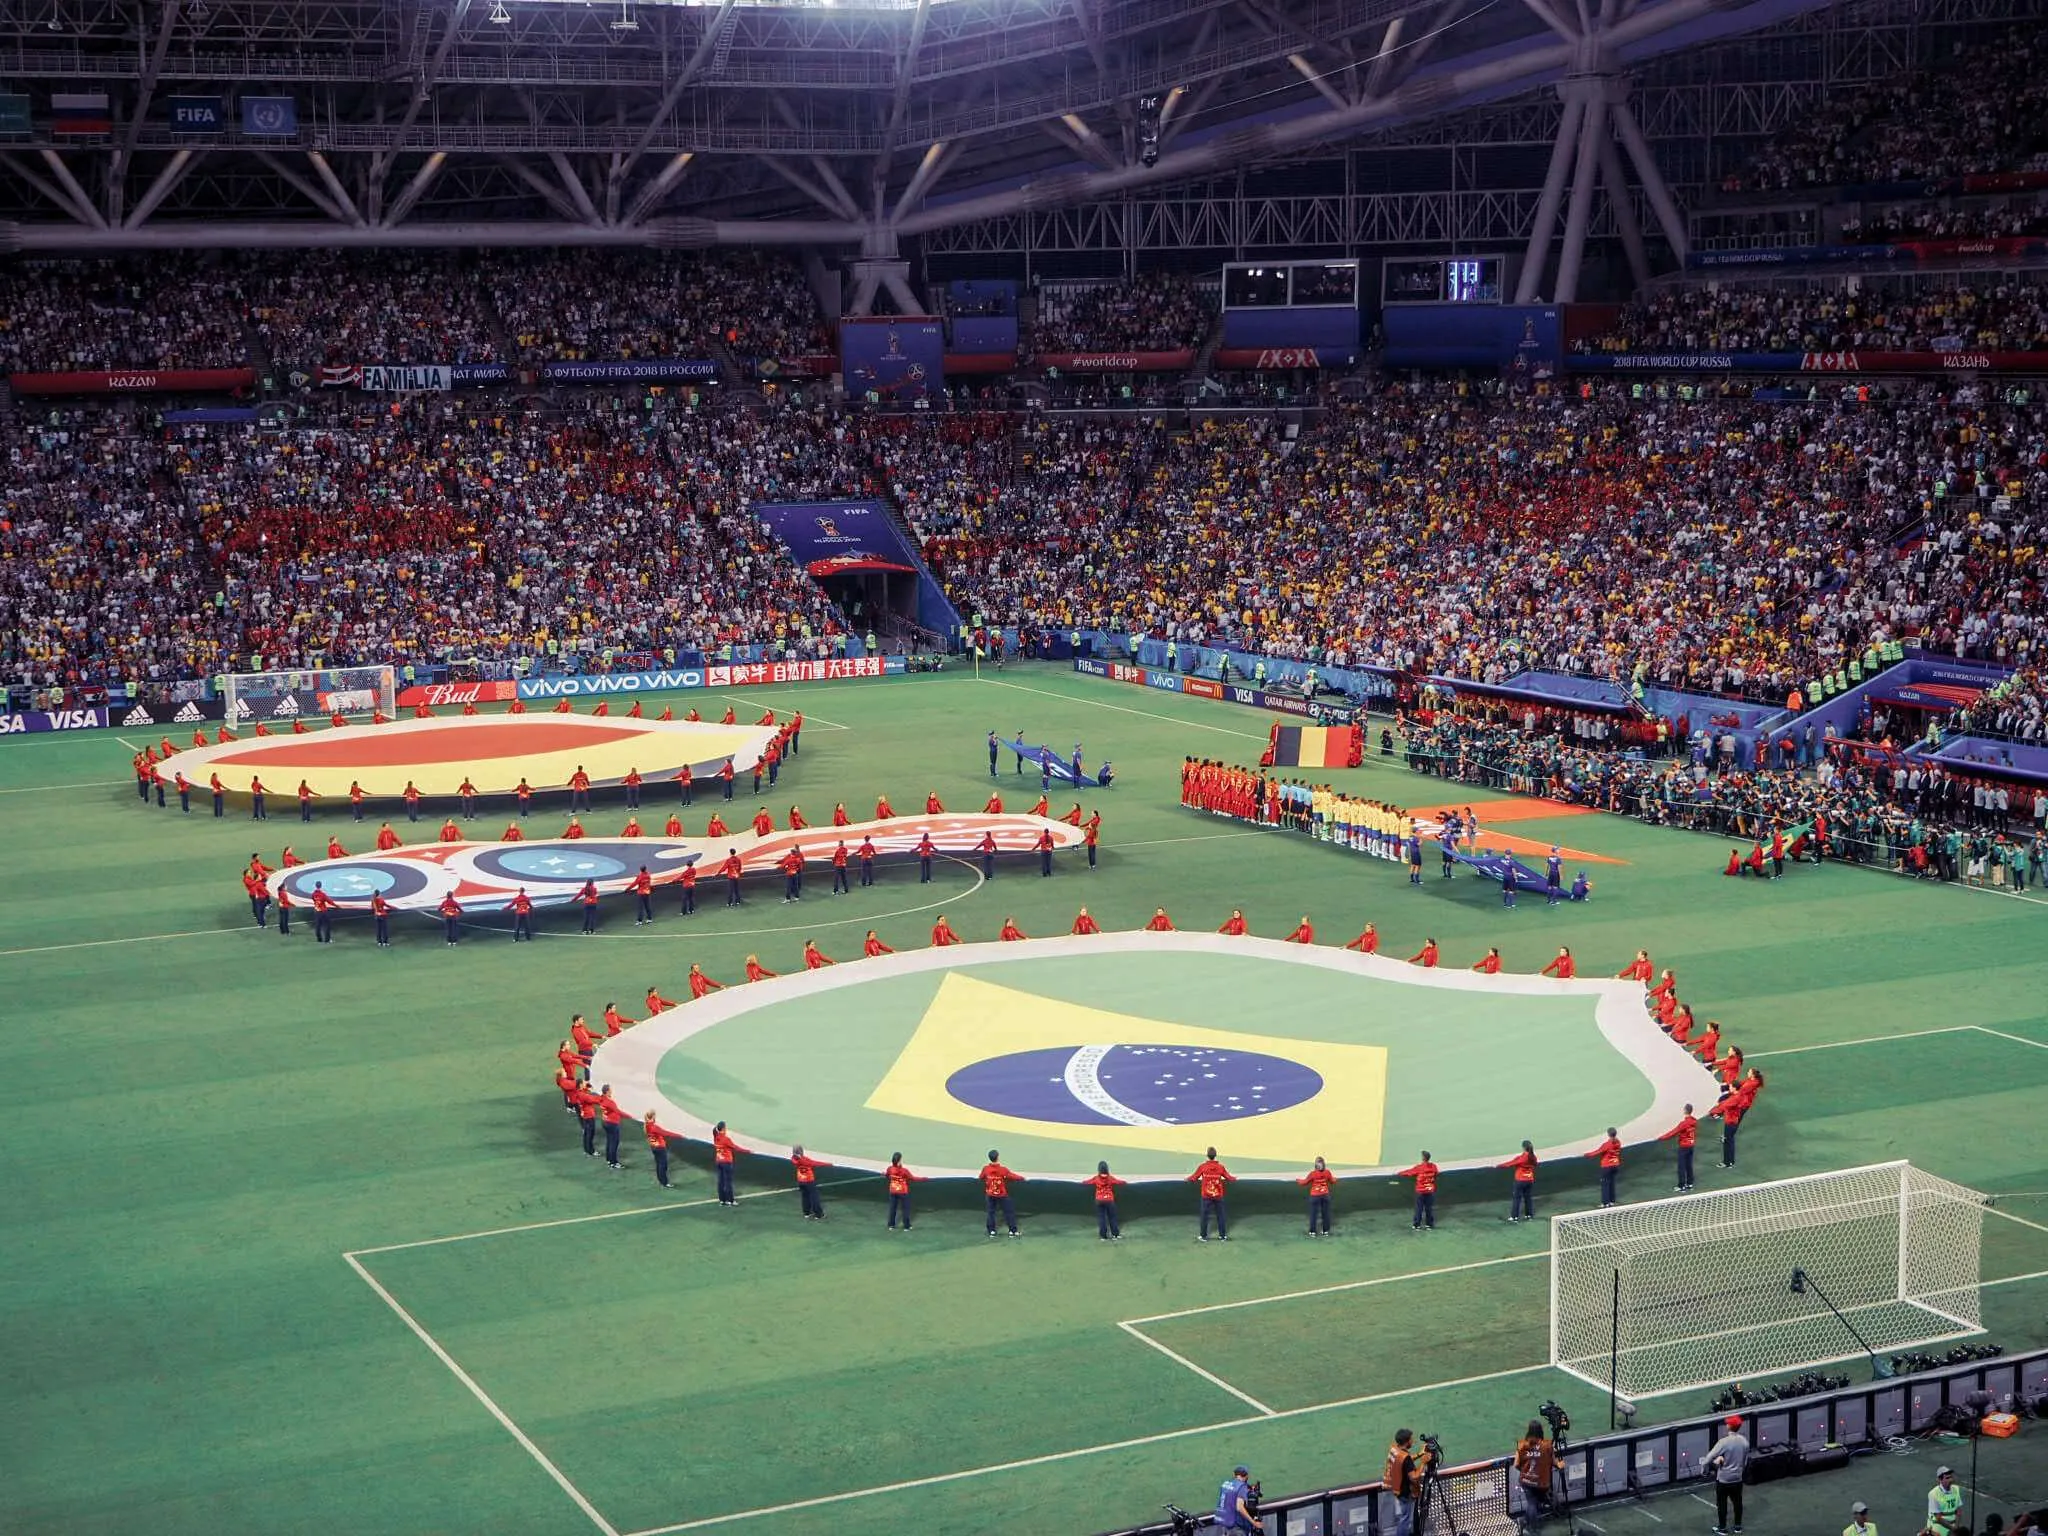 Soccer filed at FIFA world cup 2018. Beligum and Brazil flags are held between the goal posts with a canvas of the cup in the middle.